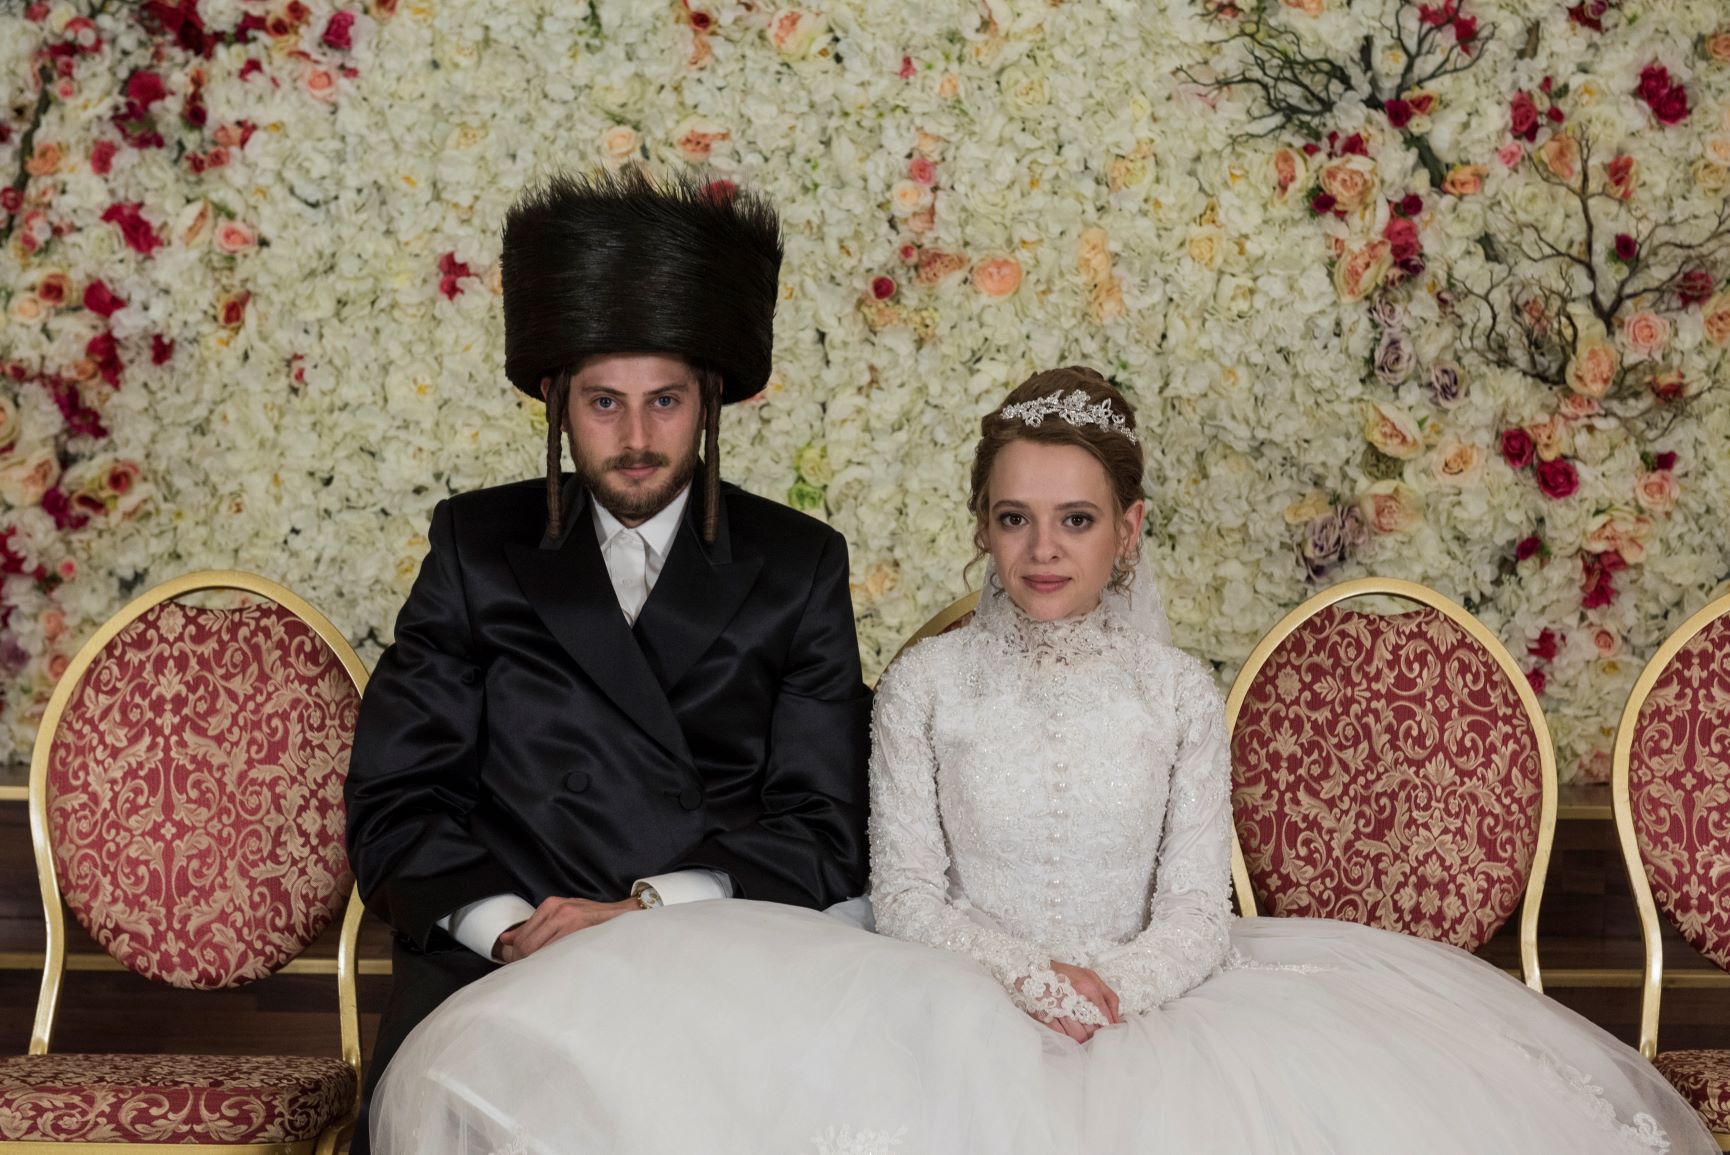 ‘Unorthodox’ Creators Were Committed to Getting the Details Right About the Orthodox Jewish Community